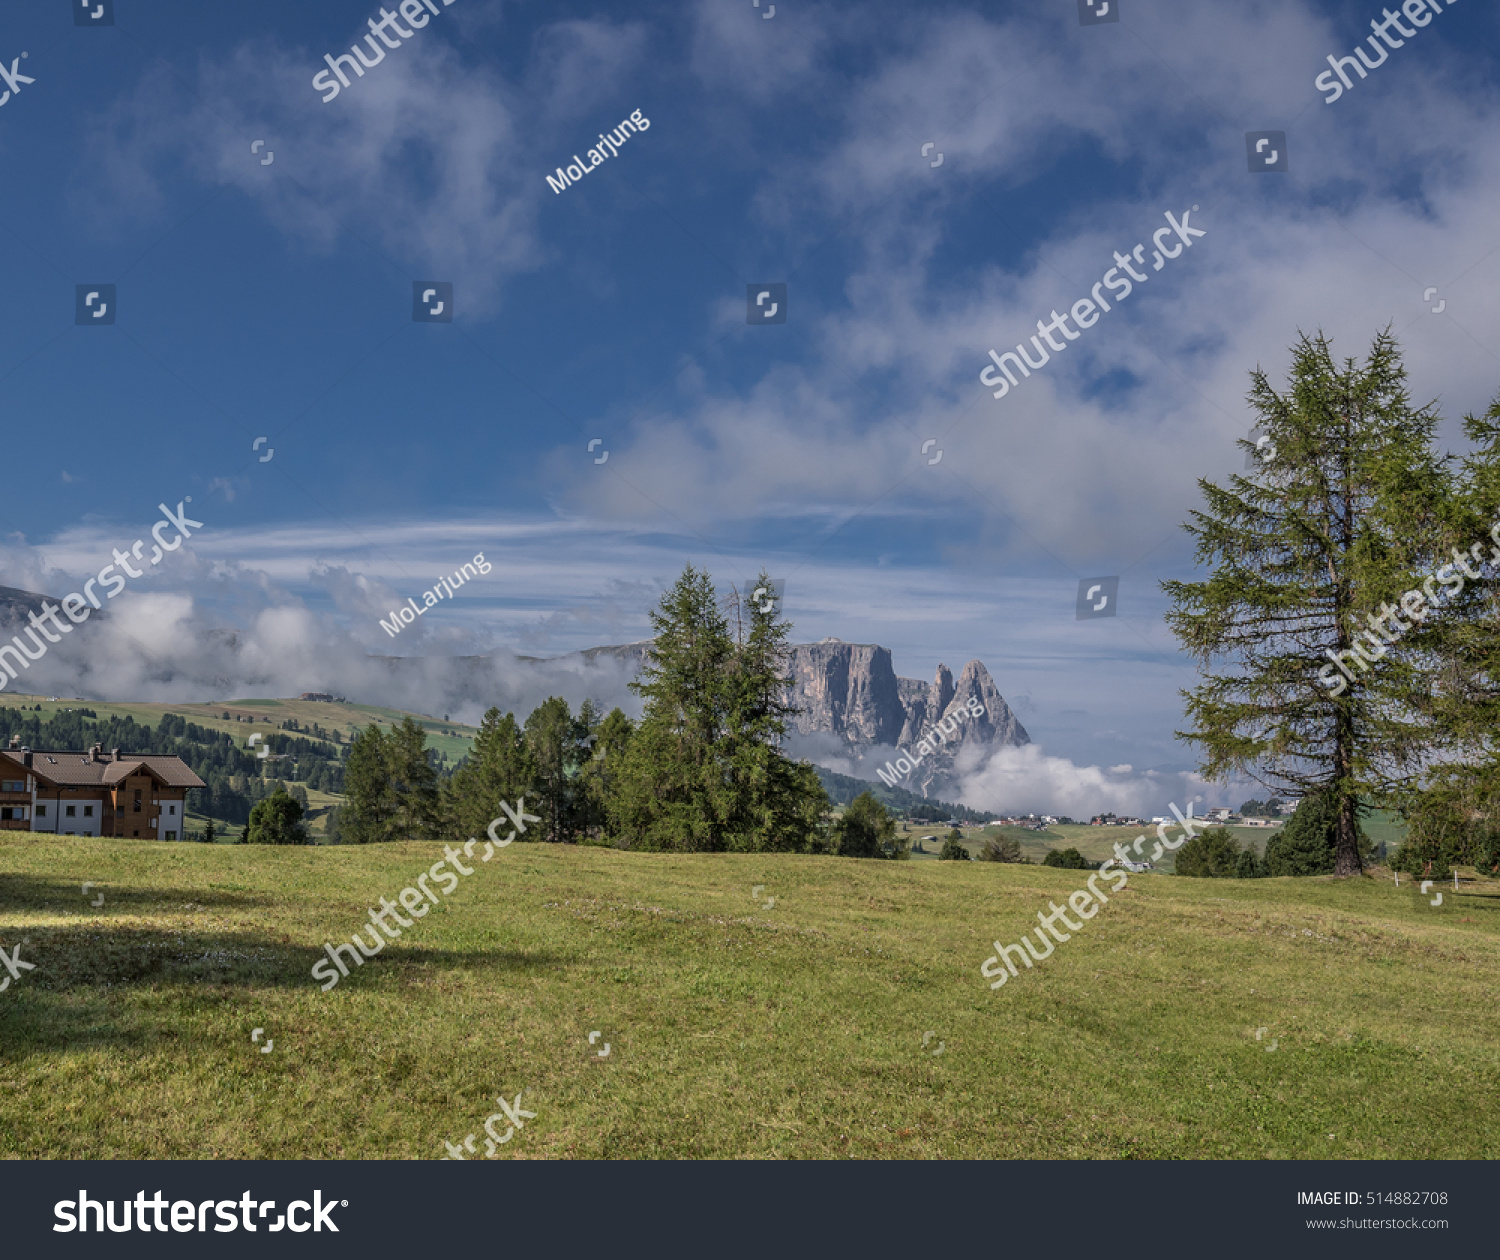 View of Sciliar mountain, most known icon of Alpe di Siusi/Seiser Alm, the highest alpine cultivated pasture, as seen from hiking path 6A, near hotel Icaro, Dolomites, Trentino, South Tyrol, Italy #514882708